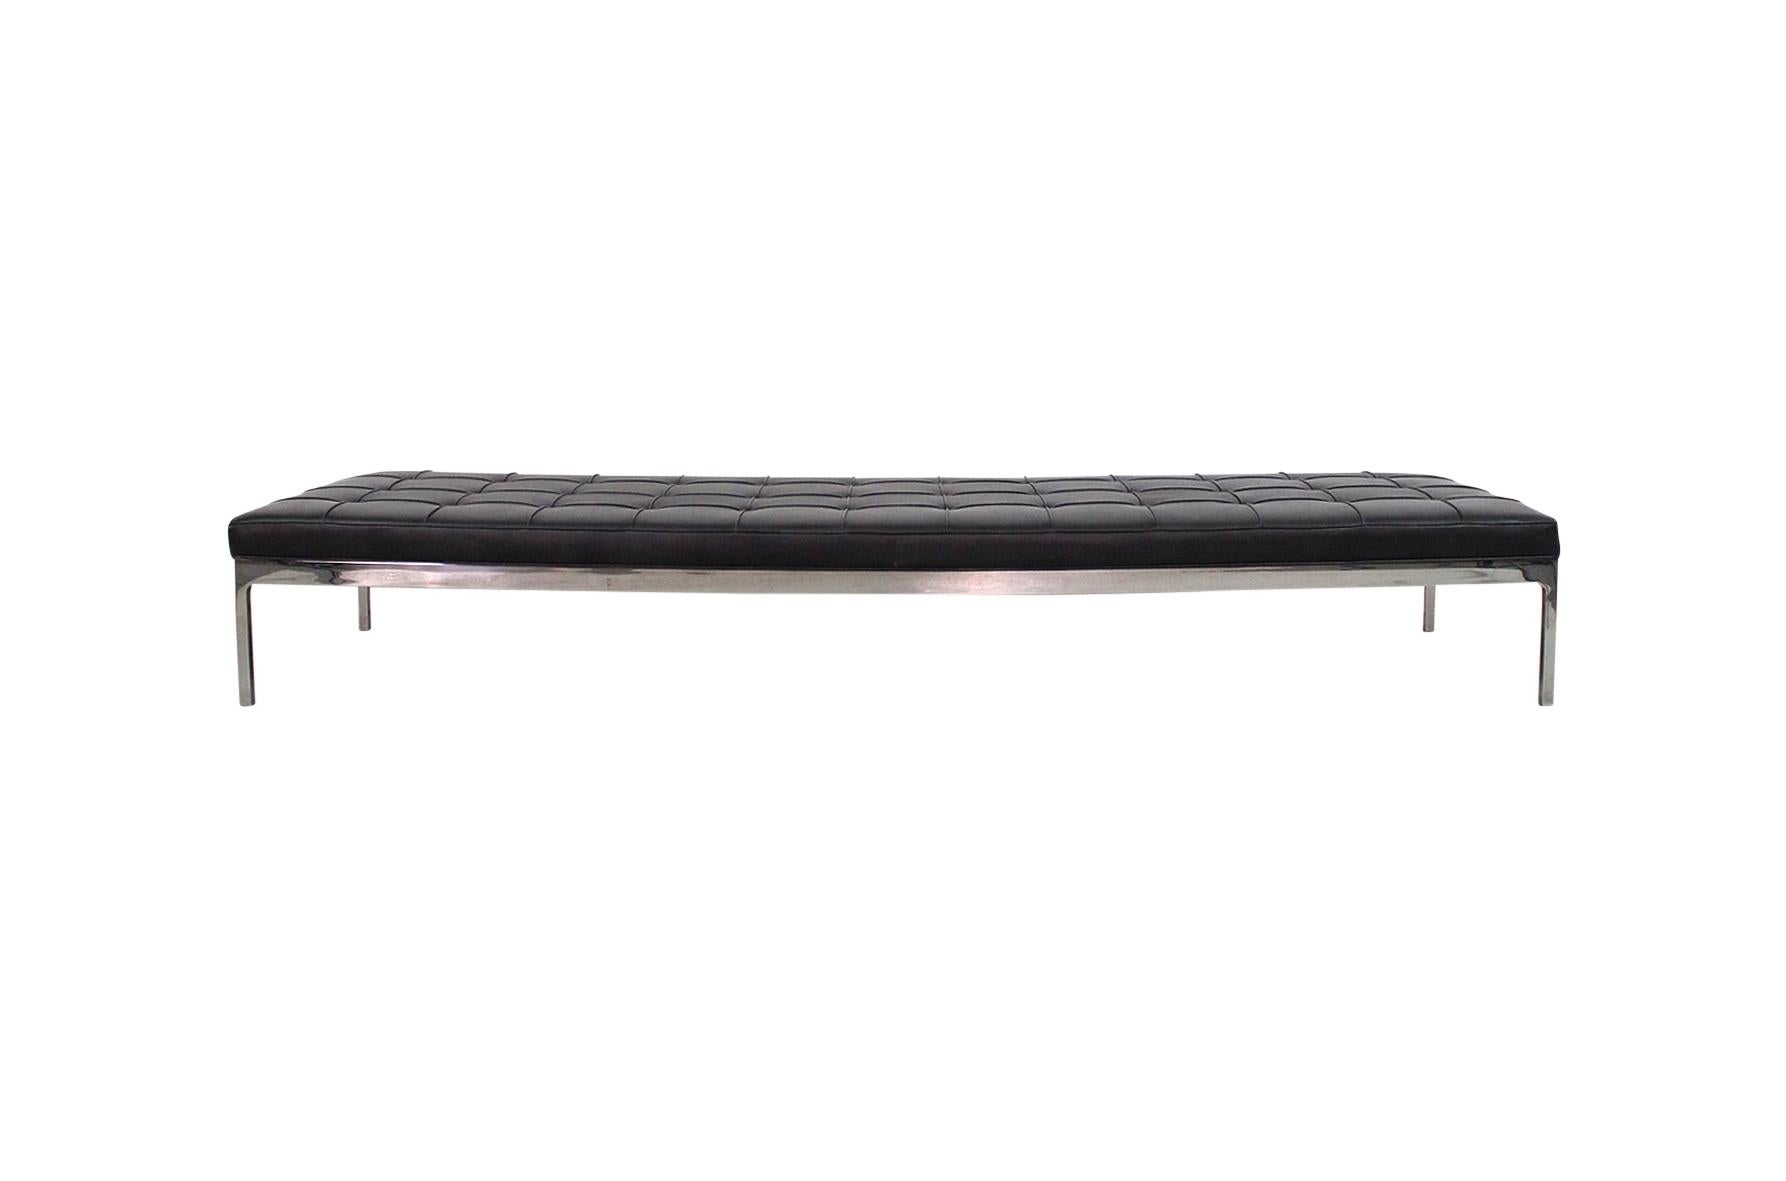 Exceptional large scale tufted leather and chrome steel daybed or bench designed by Nicos Zographos. Signed with Zographos label to underside decking.

____

We're offering our customers free domestic shipping on all items during the current health